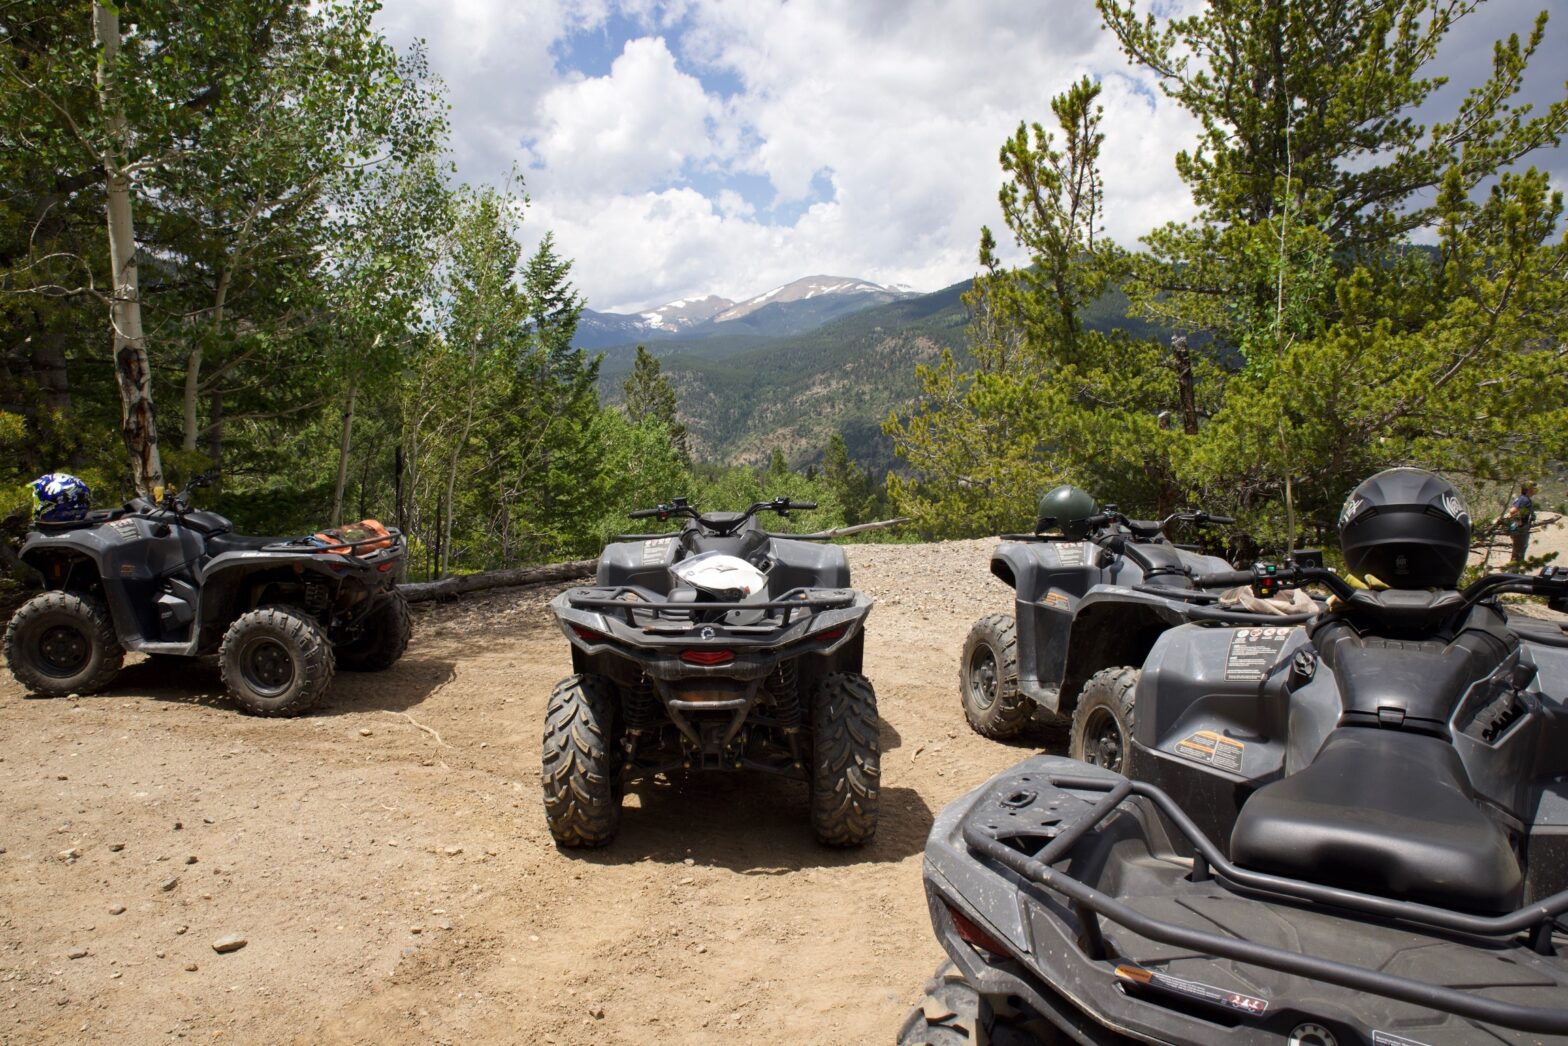 Featured image for post: Best Time of Year for ATV/UTV Tours